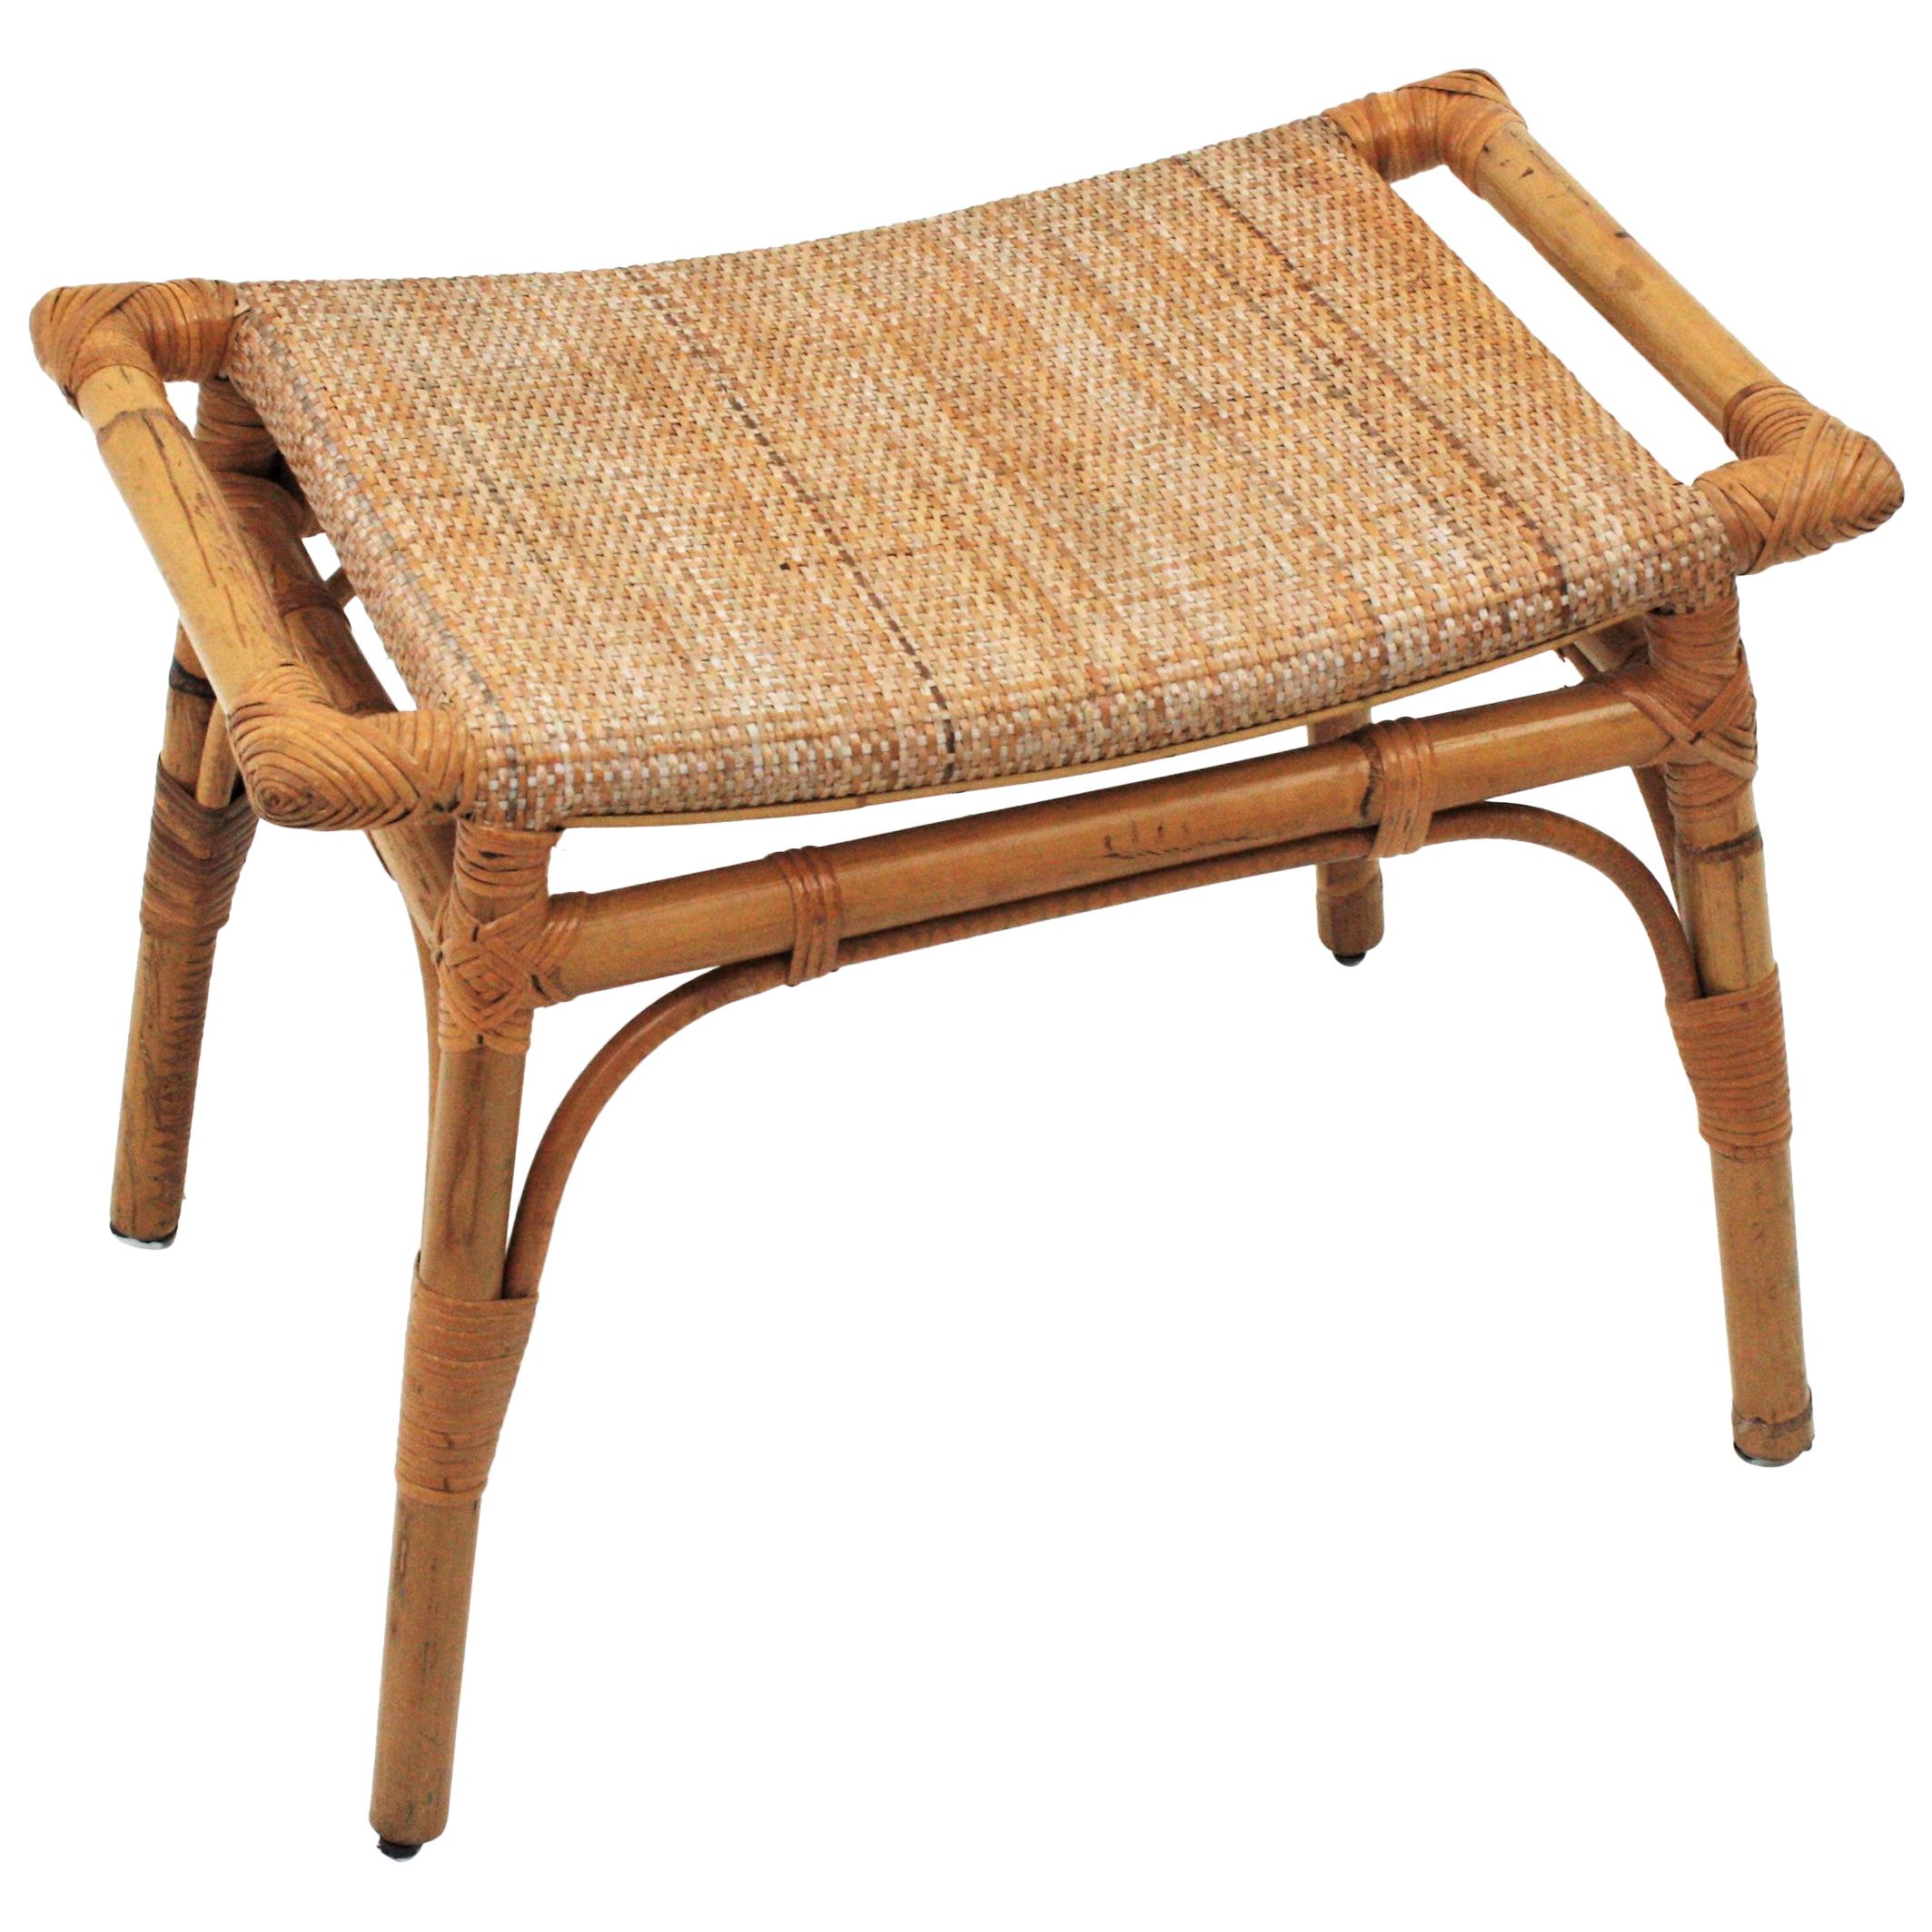 Bamboo Stool, Ottoman or Bench with Cane Seat